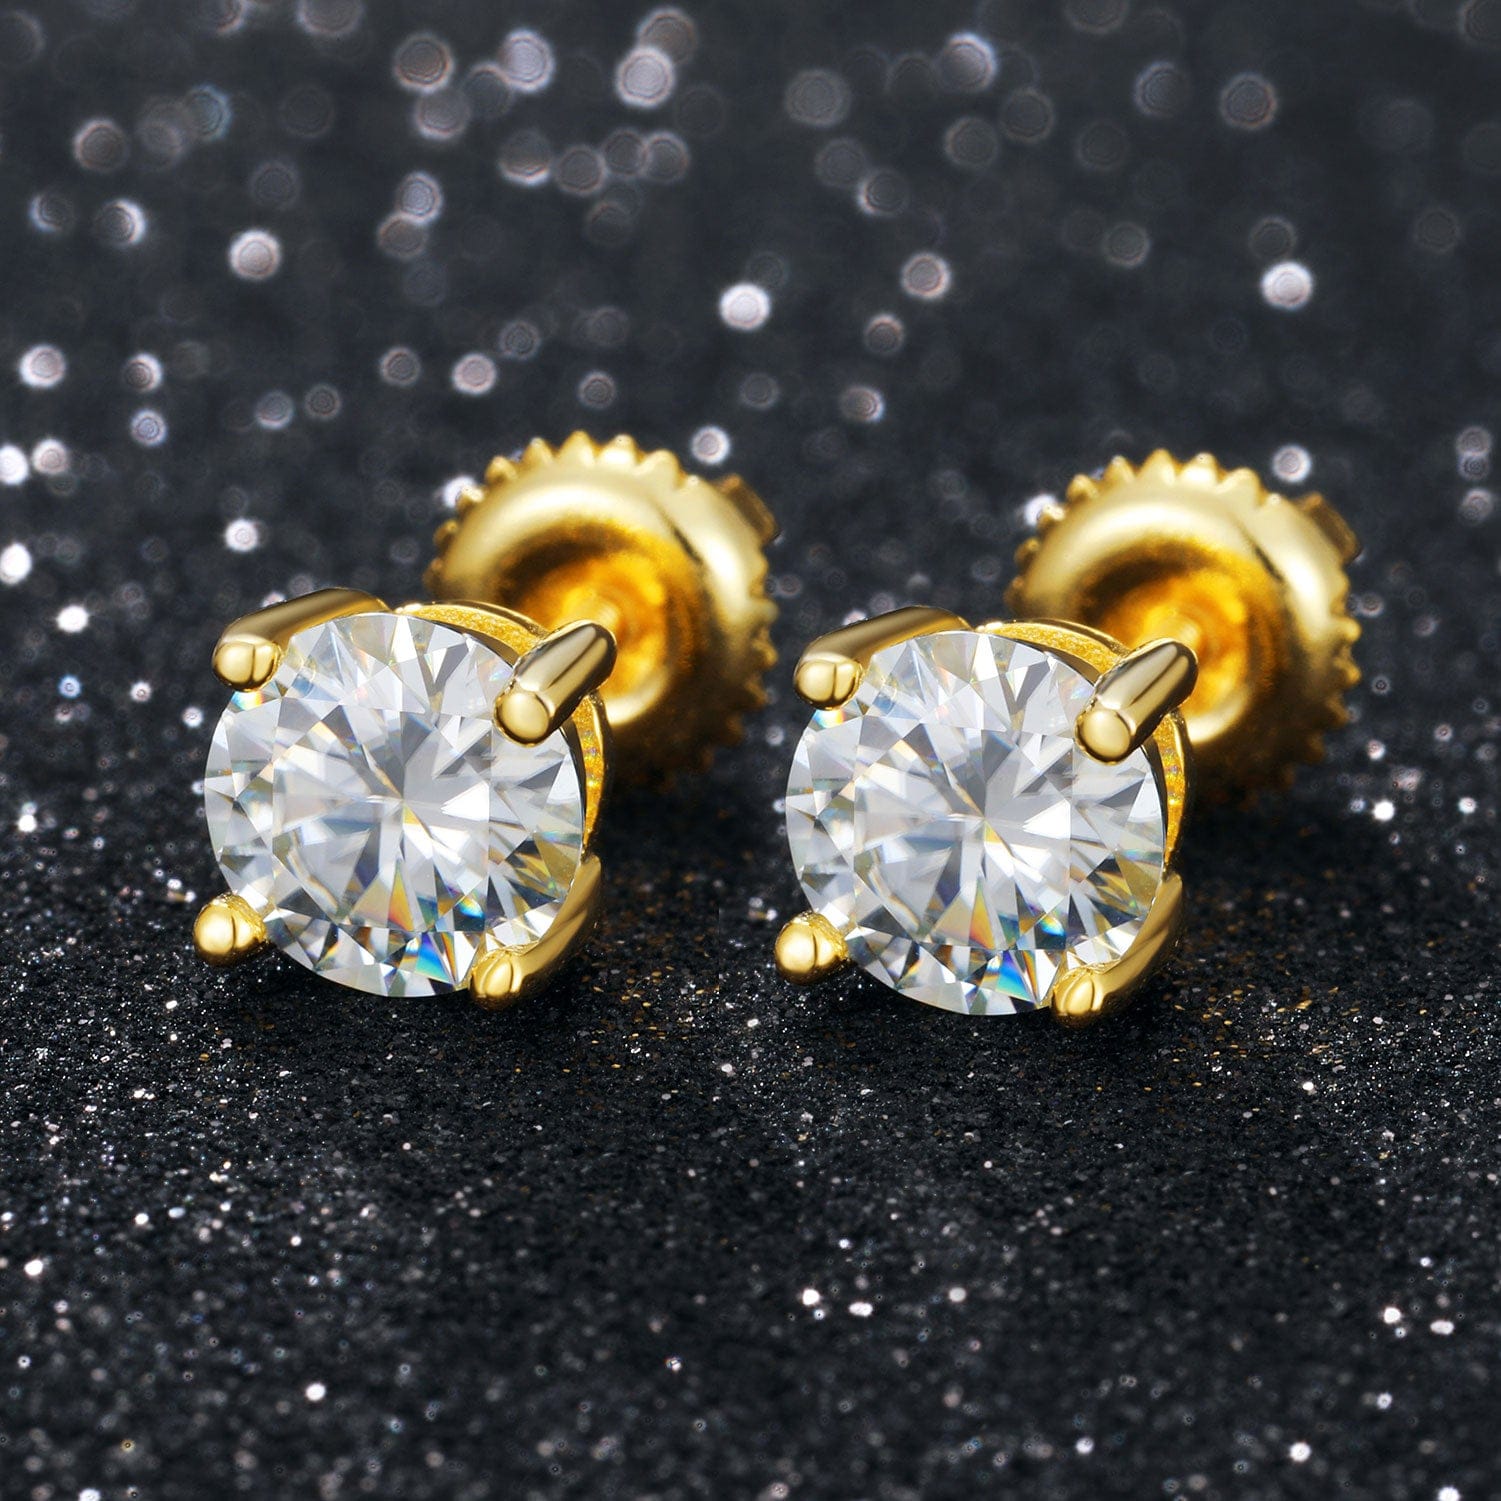 VVS Jewelry hip hop jewelry moissanite 0.1-1 CT Moissanite Sterling Silver/ Gold/ Rose Gold Stud Earrings